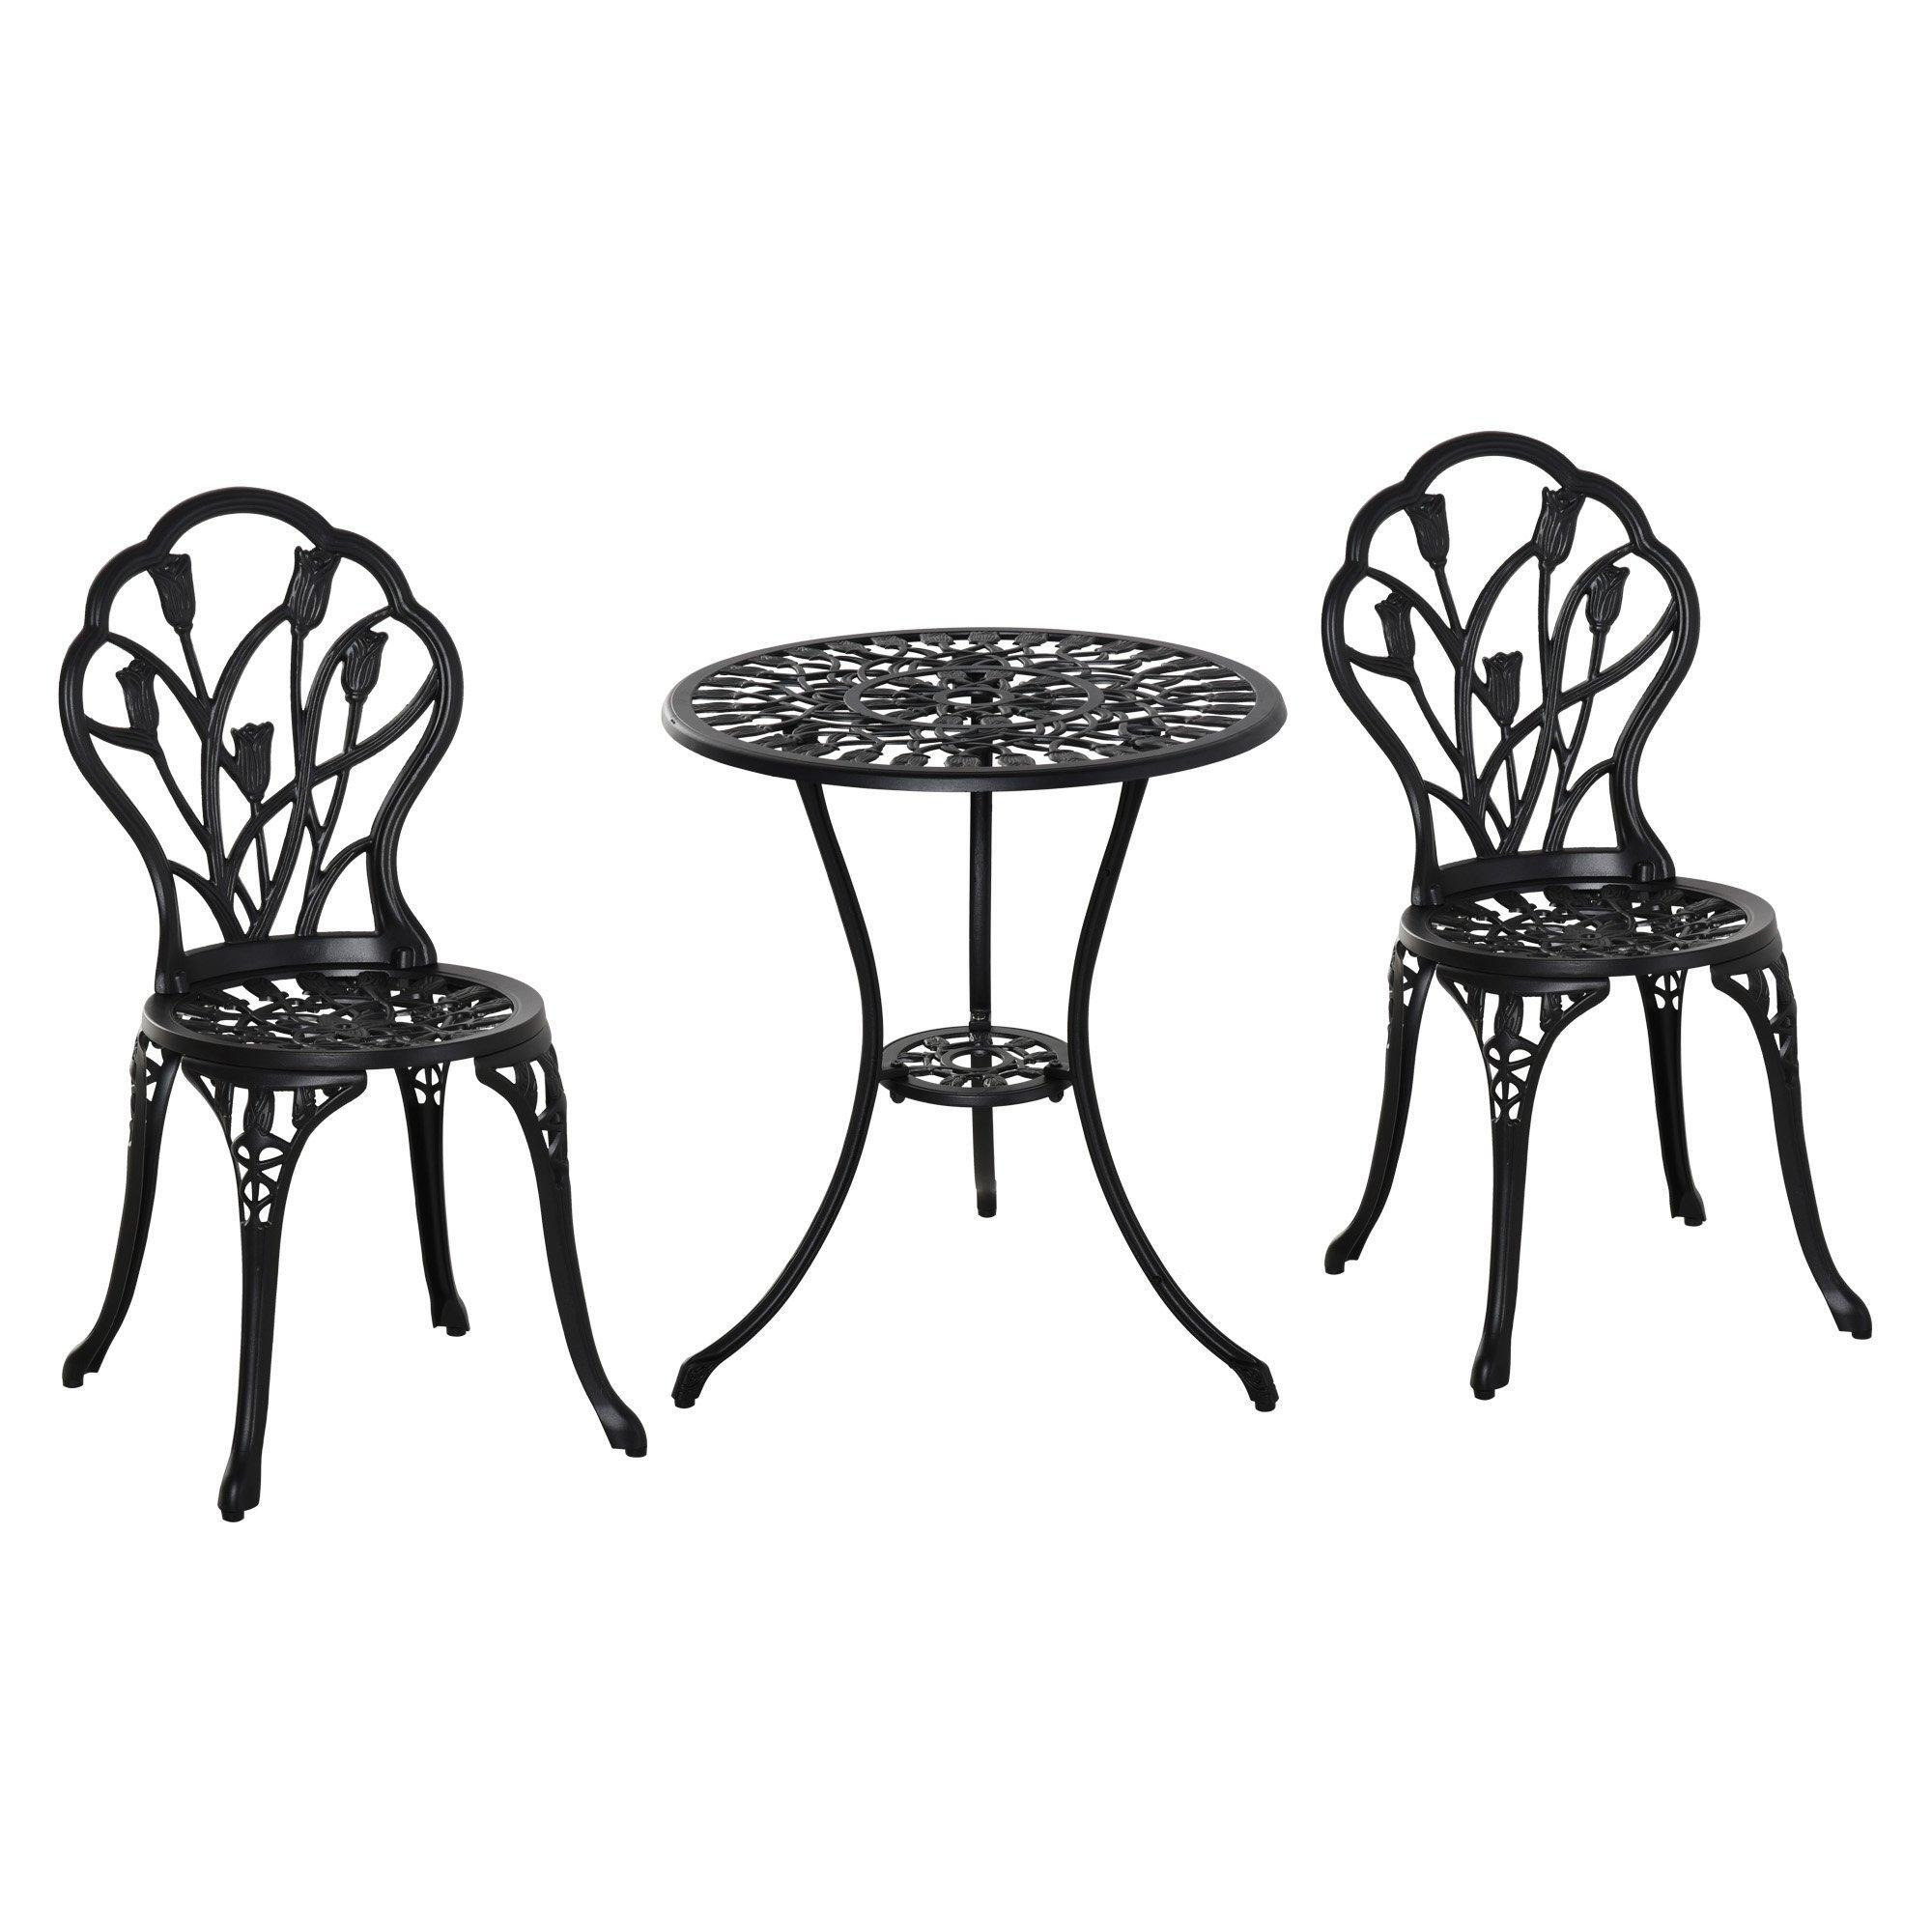 3 Piece Patio Bistro Set, Aluminium Garden Table and Chairs with Umbrella Hole - image 1